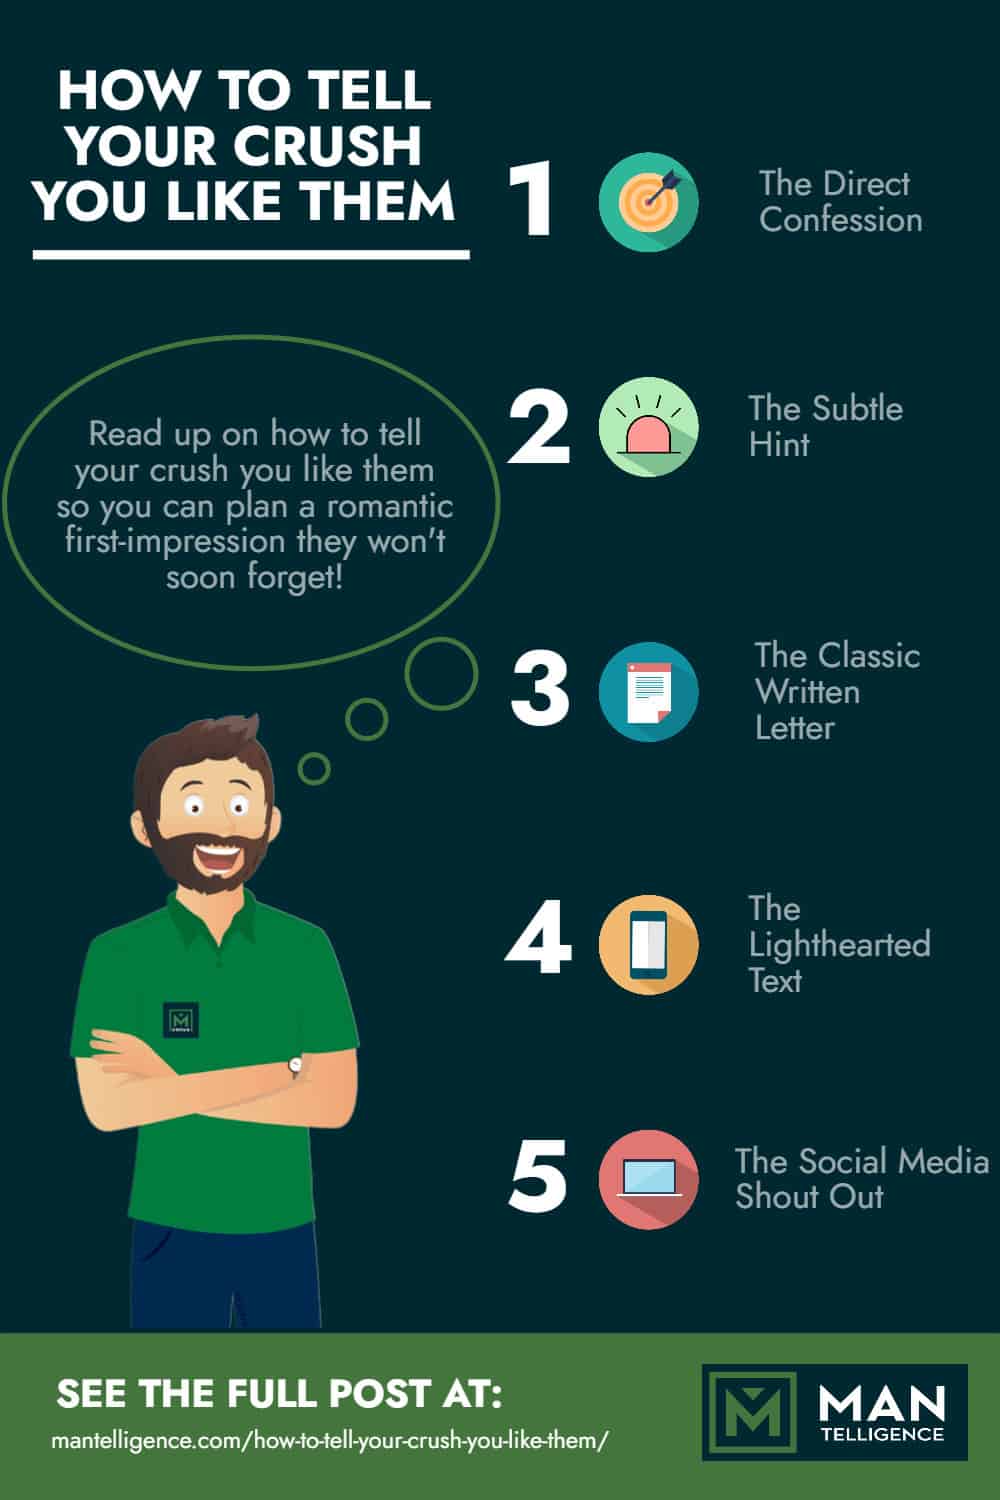 How to Tell Your Crush You Like Them - Infographic